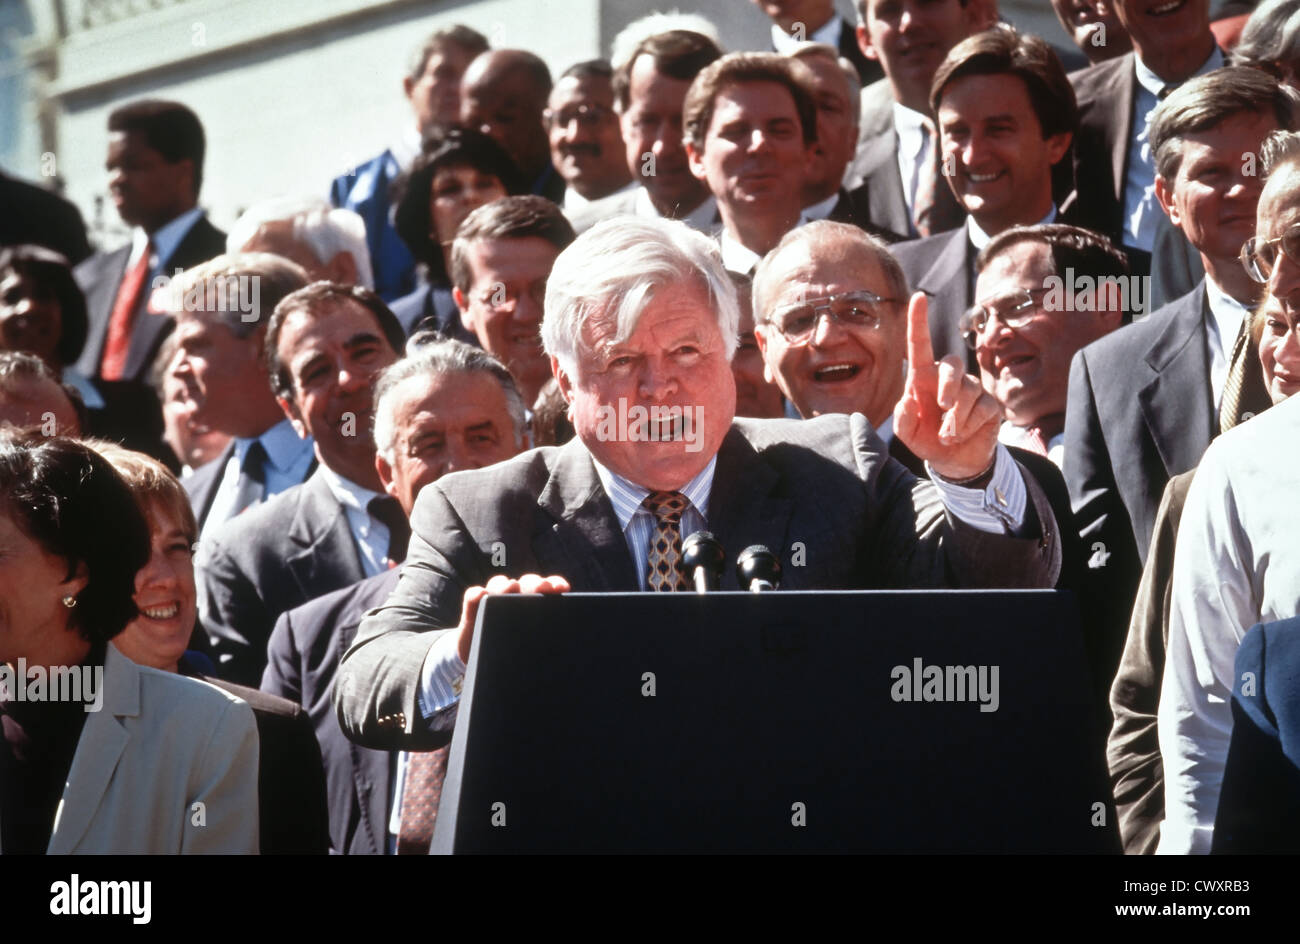 Senator Ted Kennedy speaks at a rally against a proposed Republican tax plan which will cut Social Security benefits outside the US Capitol September 24, 1998 in Washington, DC. Stock Photo